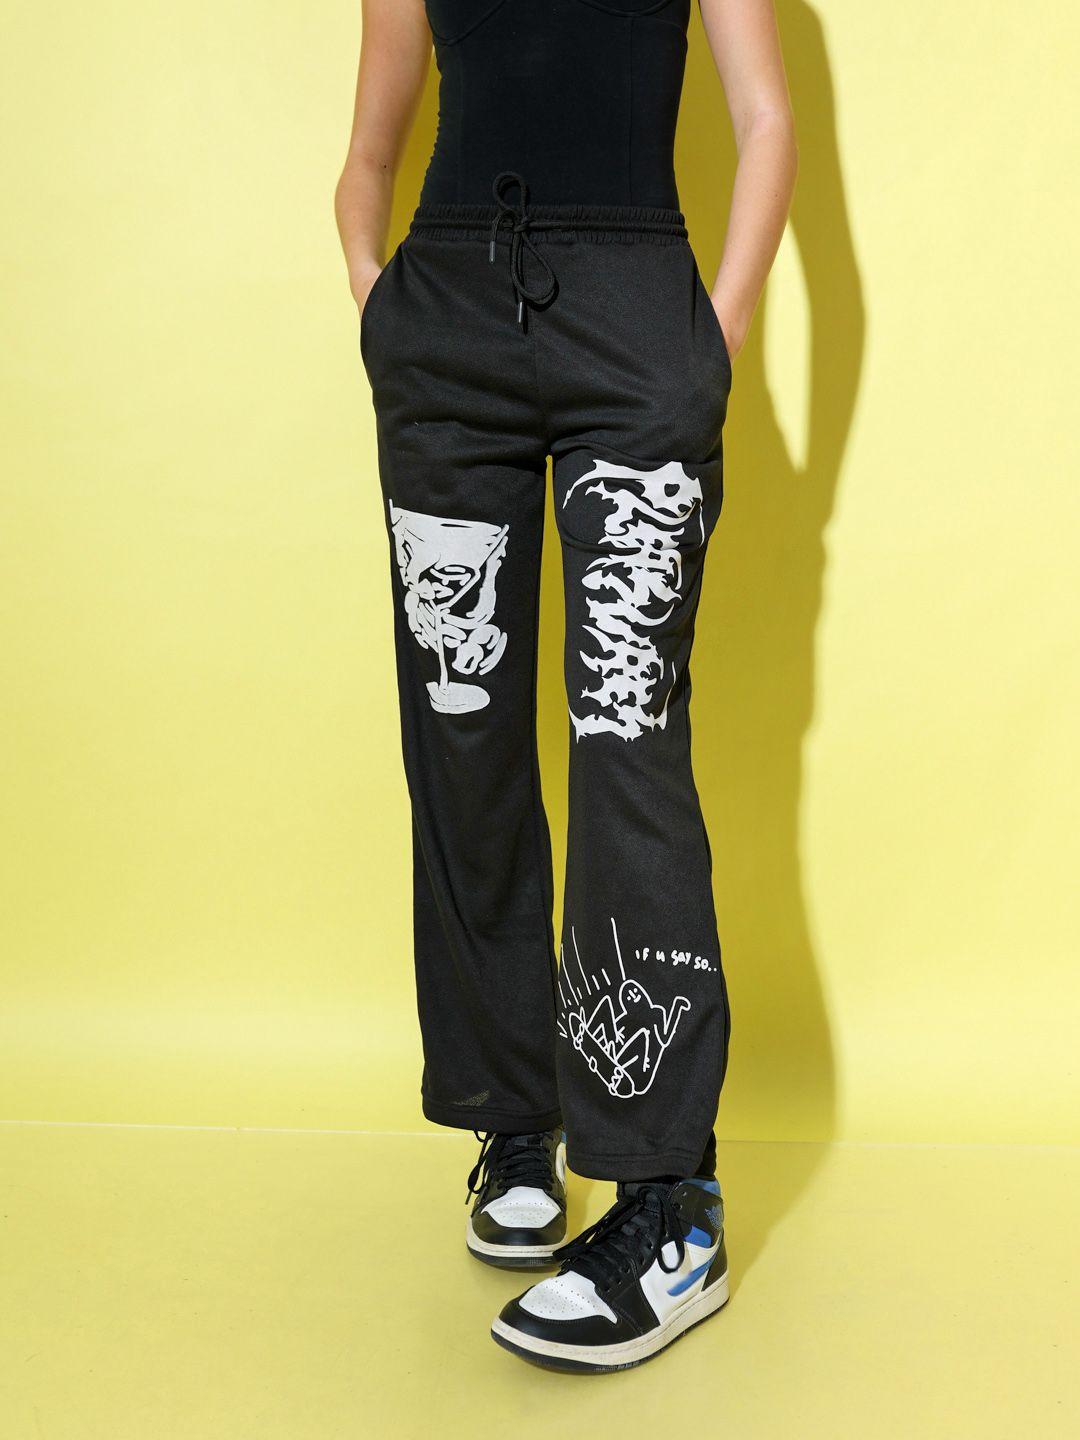 stylecast x hersheinbox monochrome printed pure cotton trousers